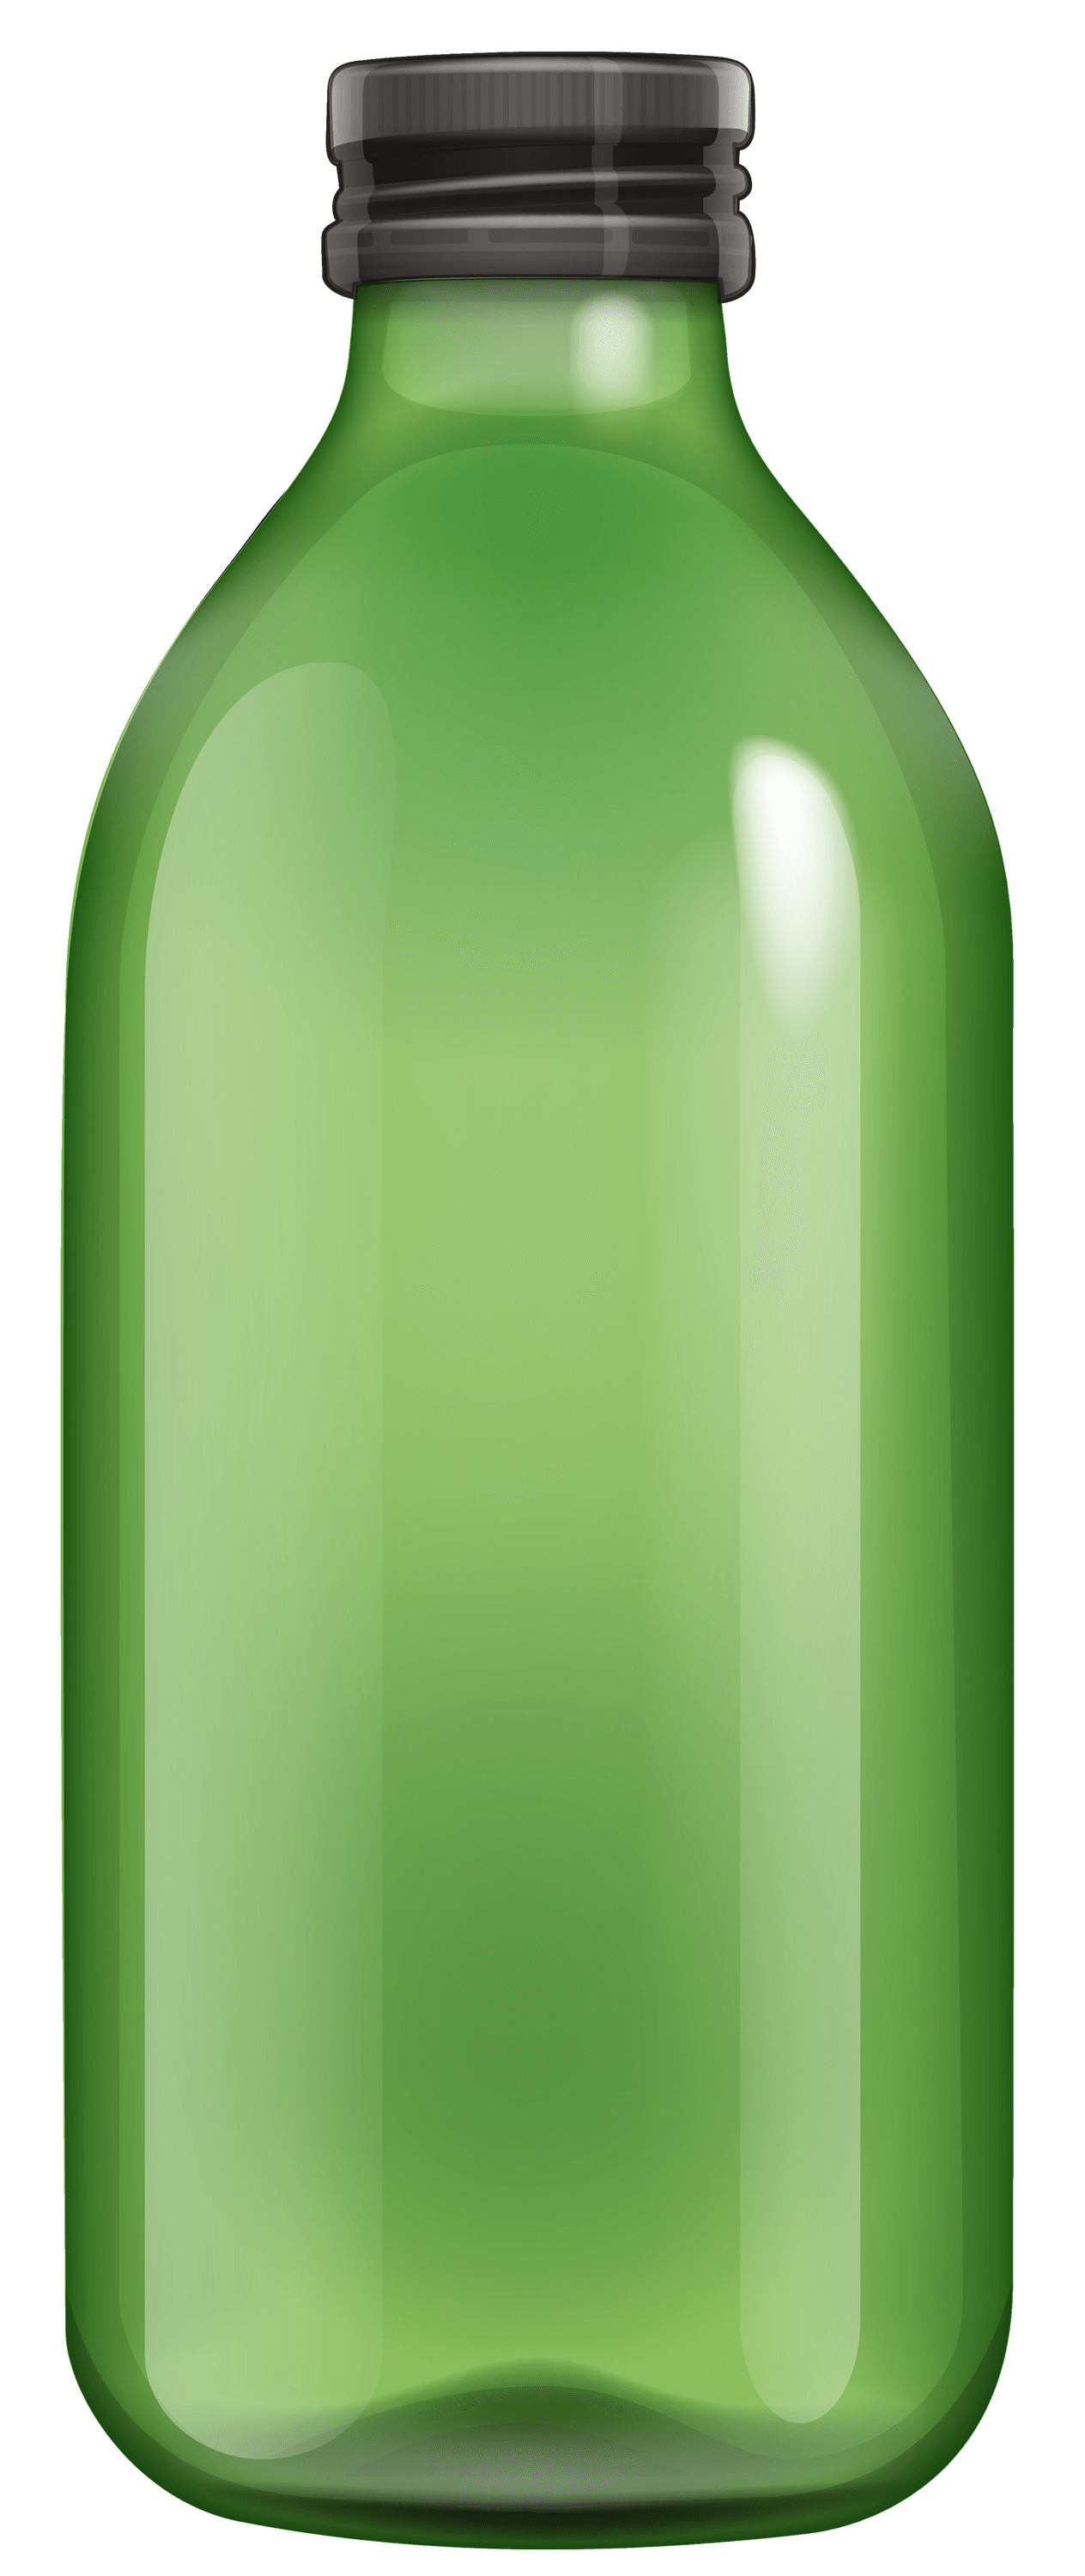 Bottle Green icons